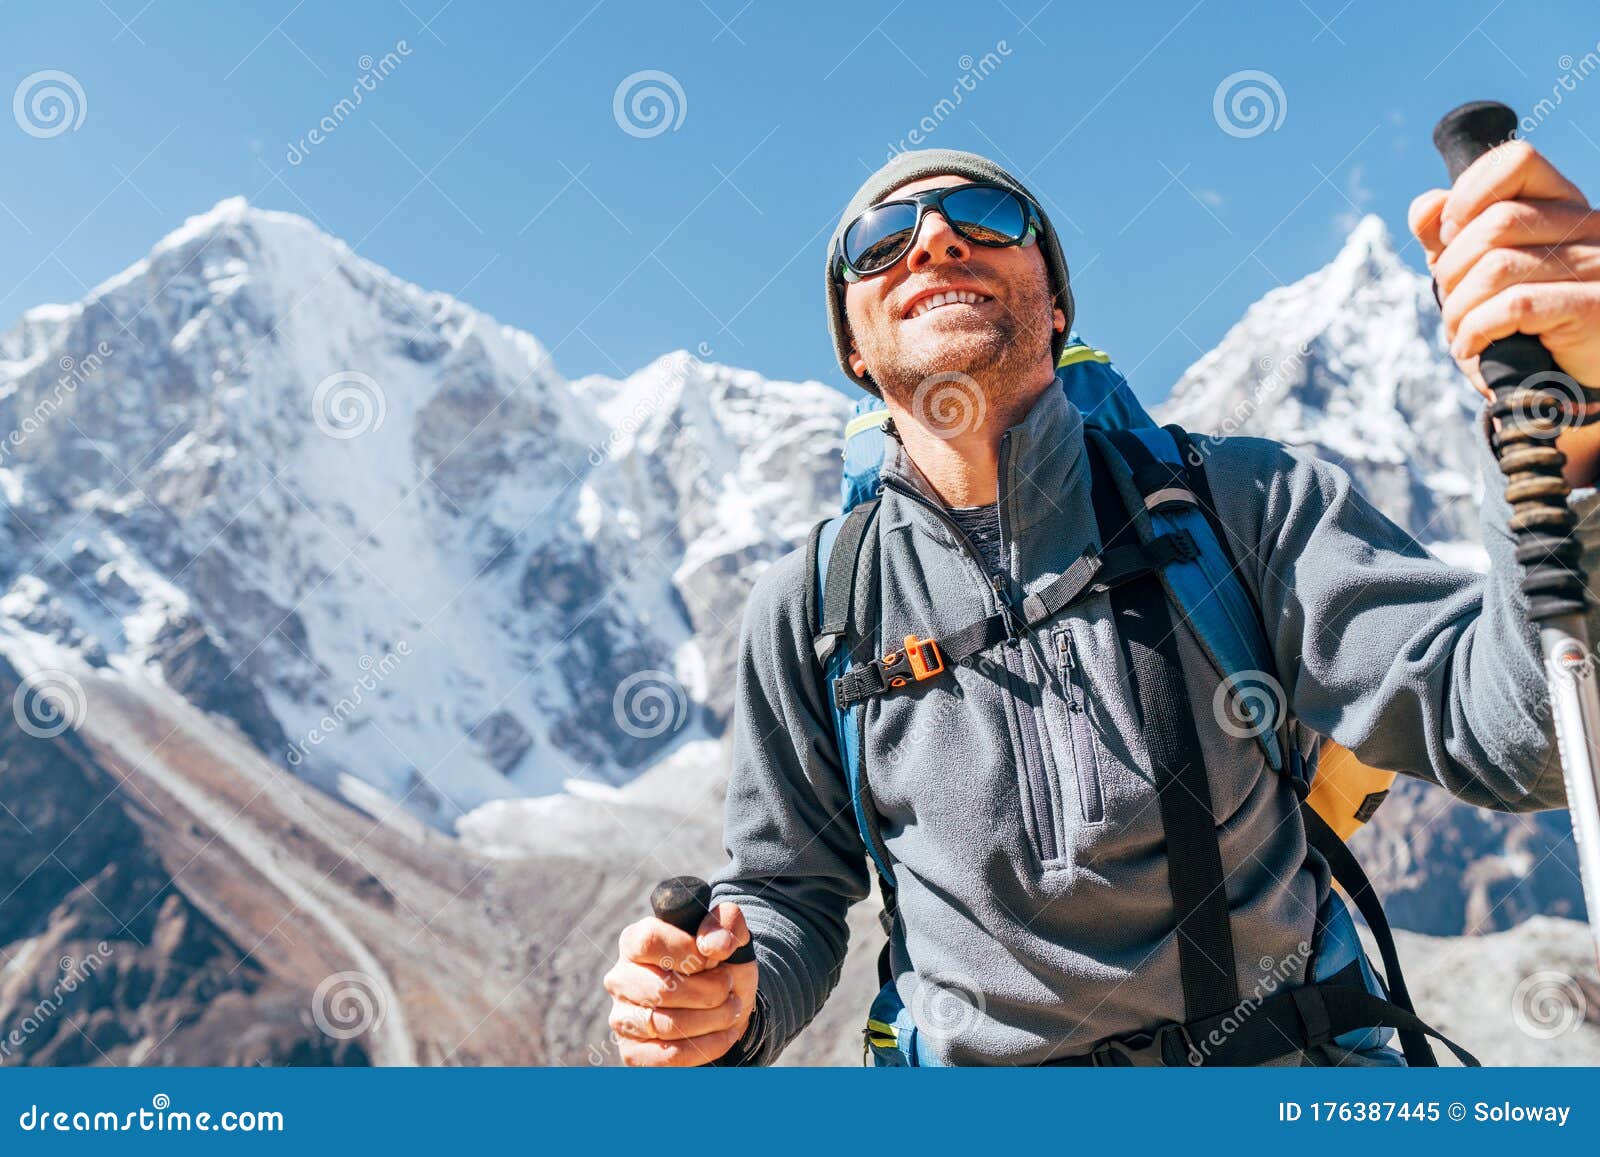 portrait of smiling hiker man on taboche 6495m and cholatse 6440m peaks background with trekking poles, uv protecting sunglasses.